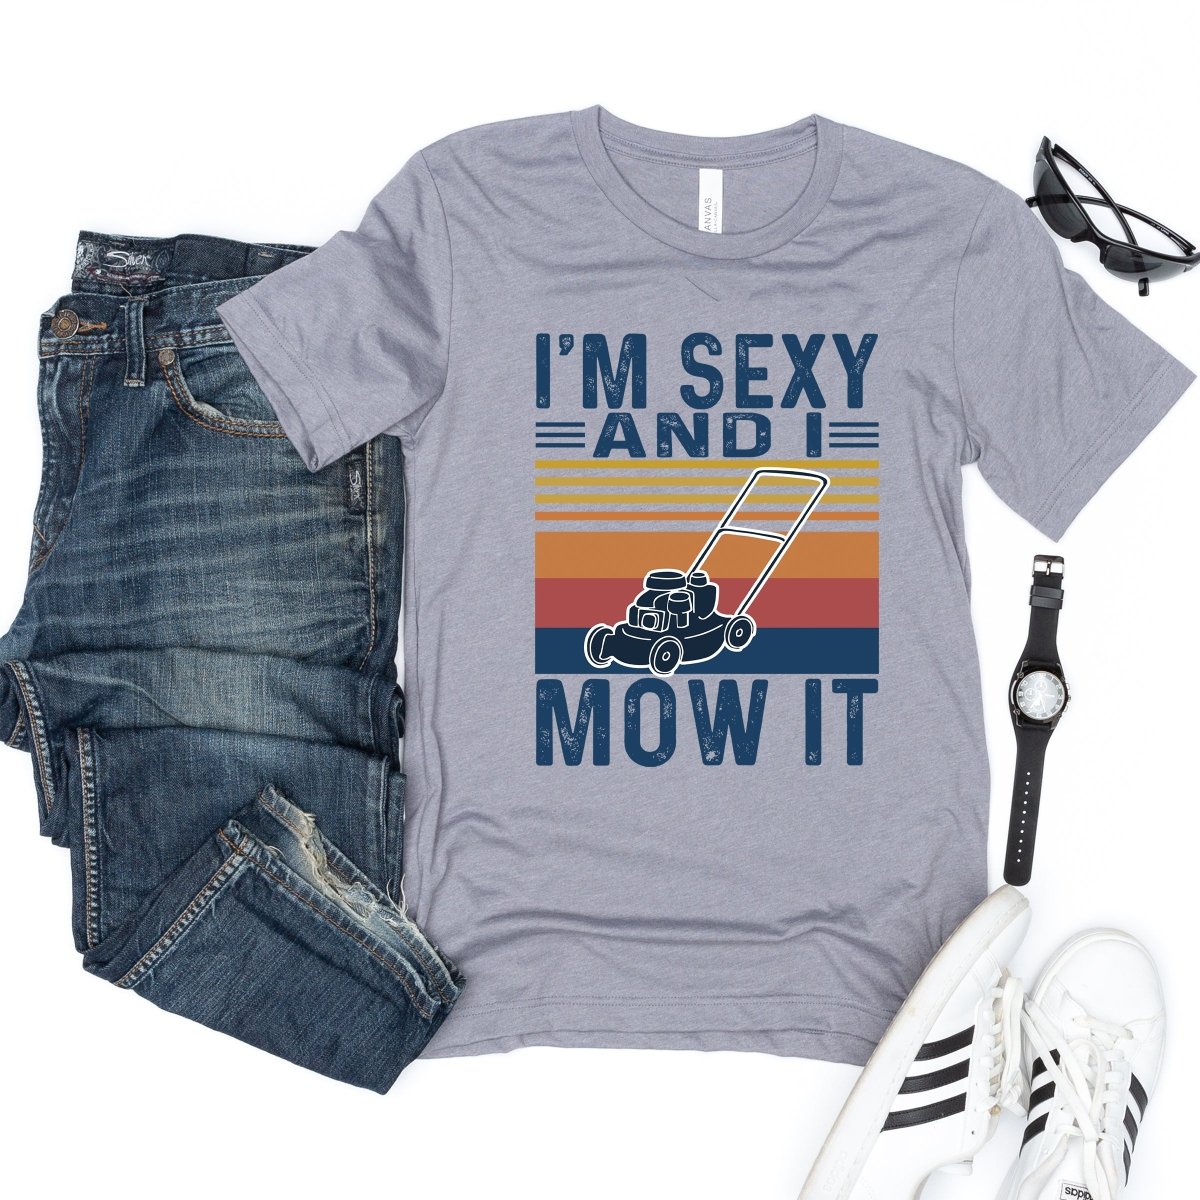 I'm Sexy and I Mow It Tee - Limeberry Designs